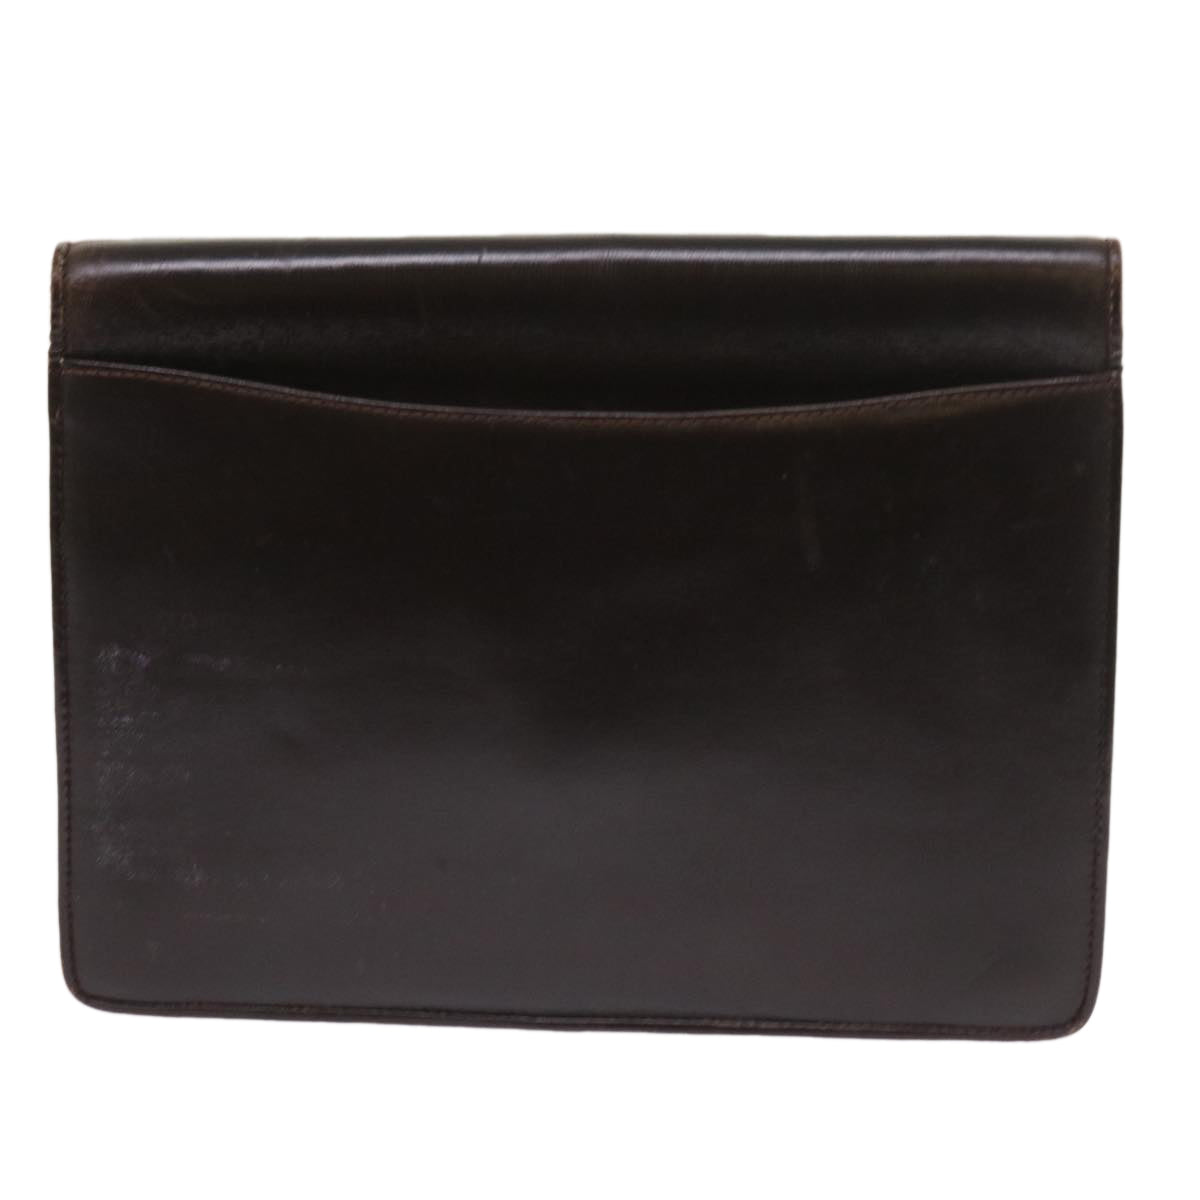 CELINE Clutch Bag Leather Brown Auth bs8620 - 0